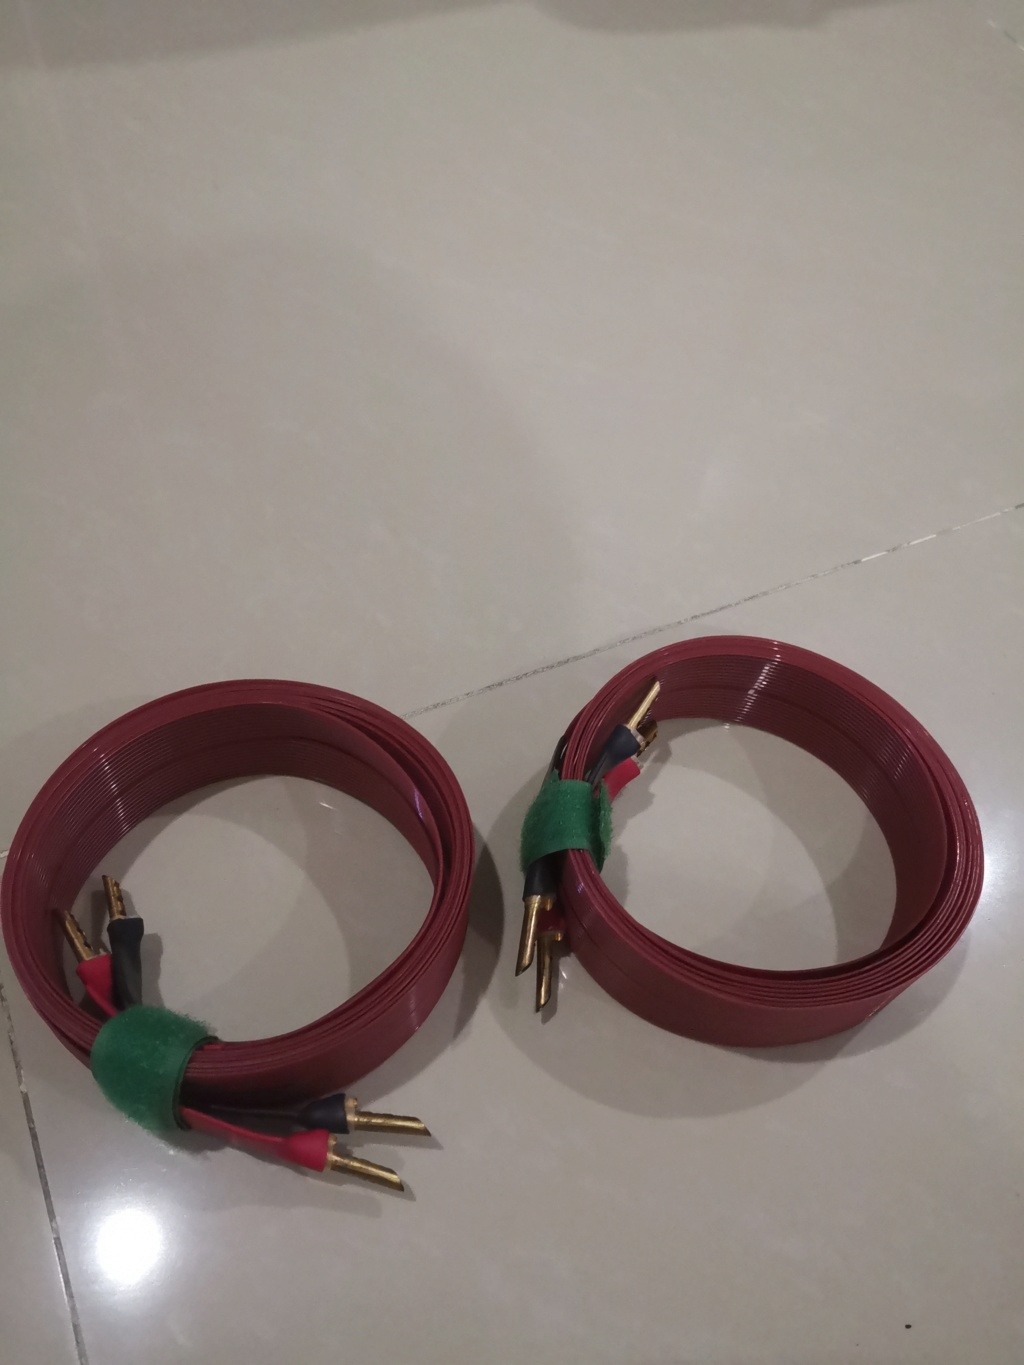 Nordost Red Dawn LS Speaker Cables (Sold) Img_2015